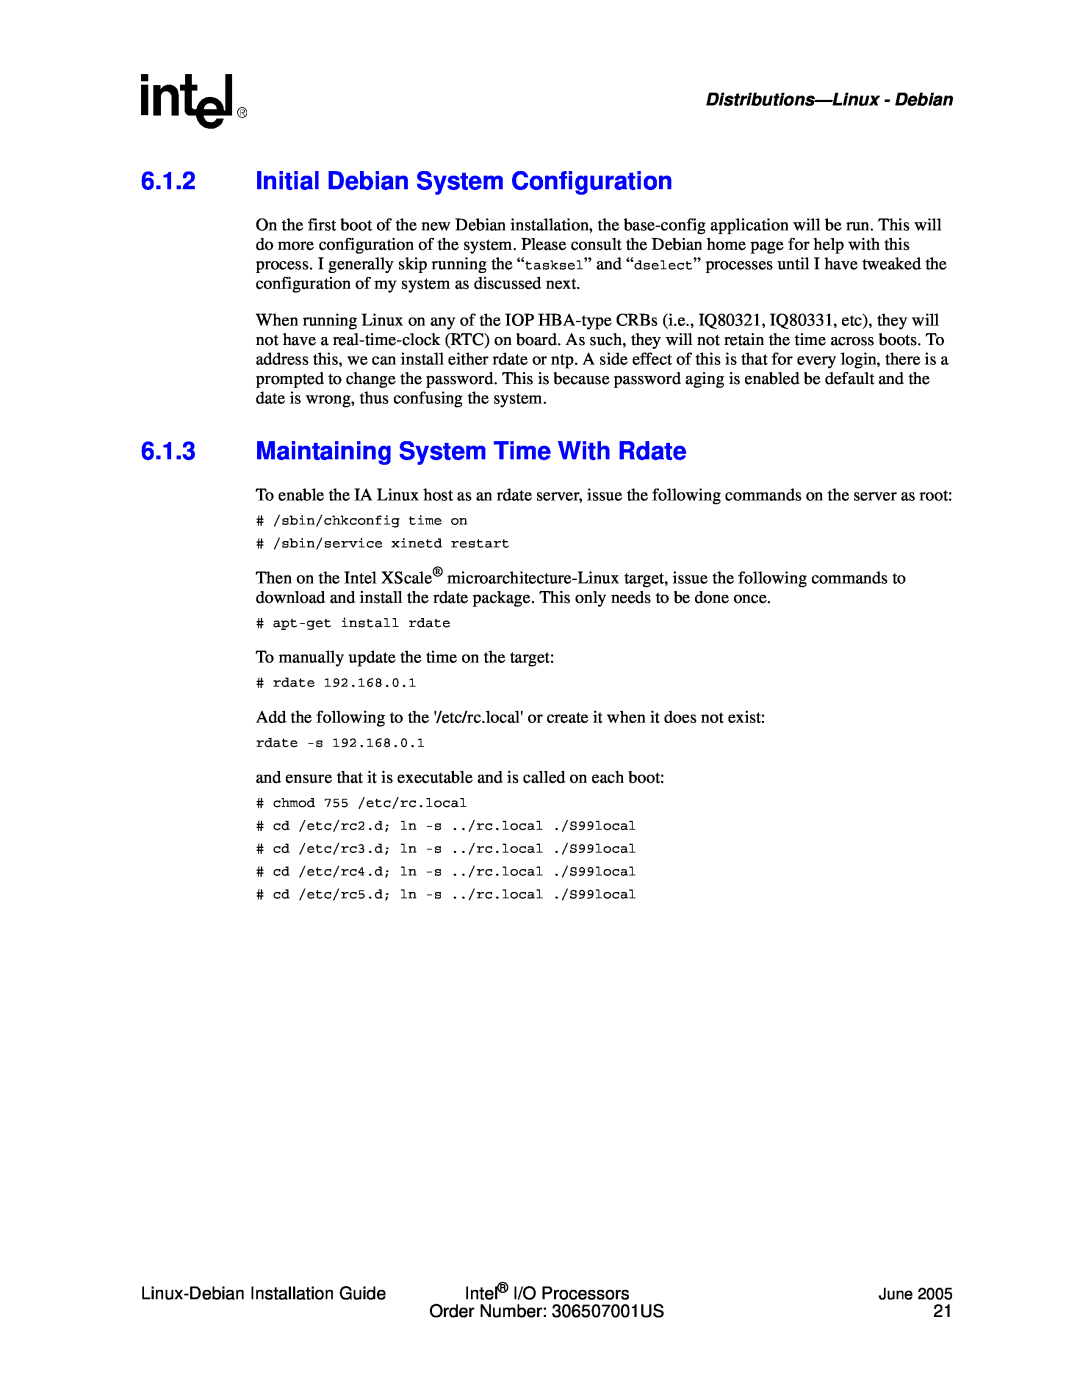 Intel I/O Processor manual 6.1.2Initial Debian System Configuration, 6.1.3Maintaining System Time With Rdate 